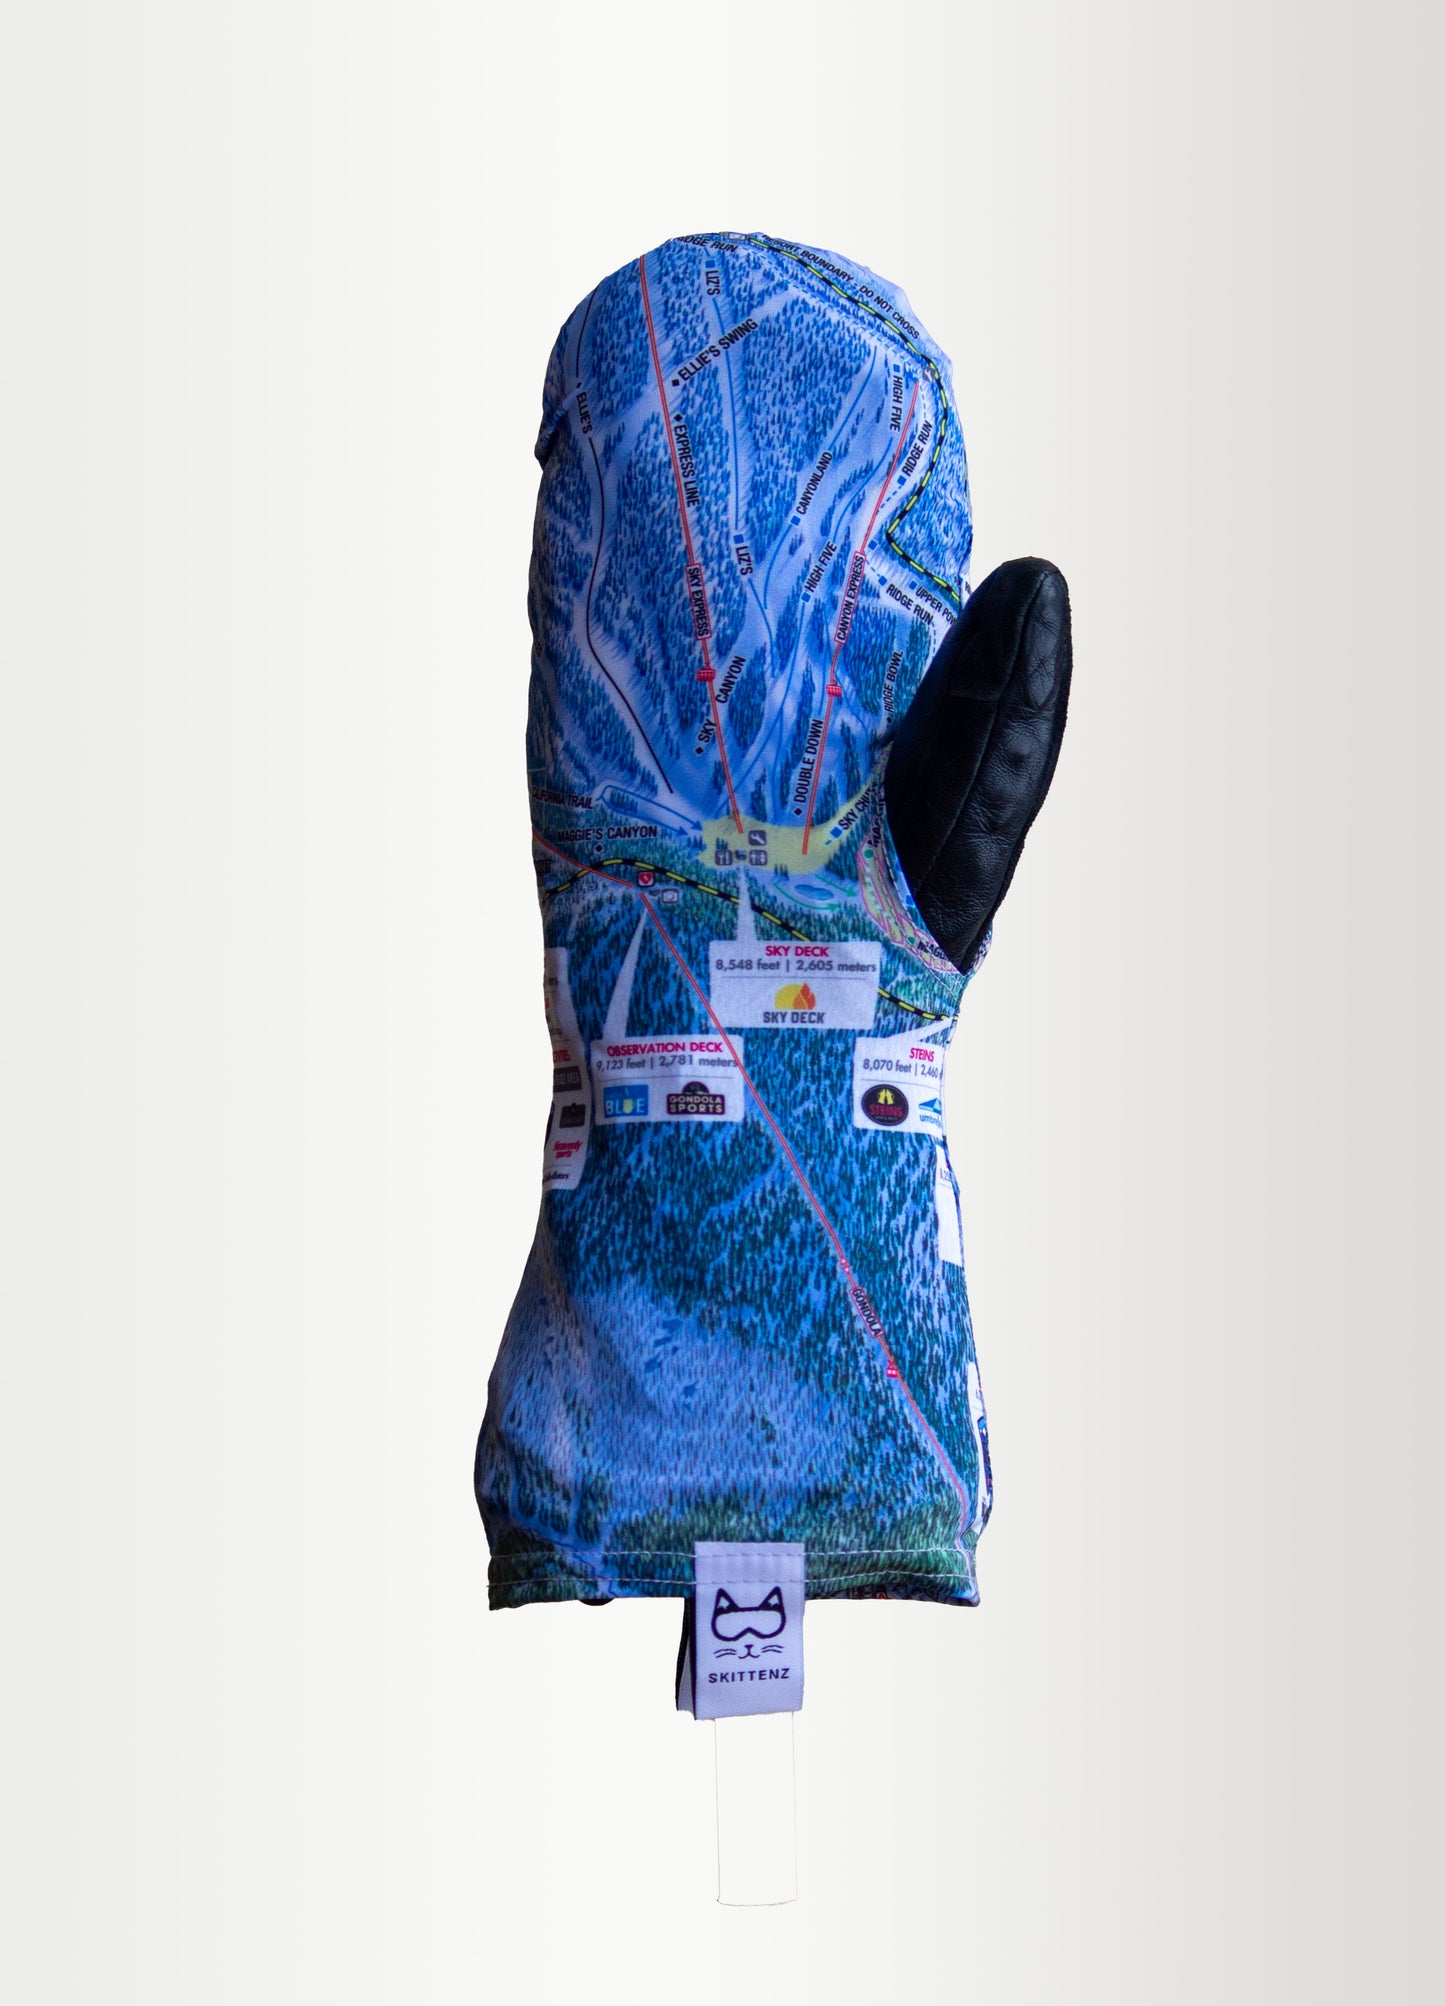 Heavenly Ski or Snowboard Trail Map Skins for Mittens or Gloves